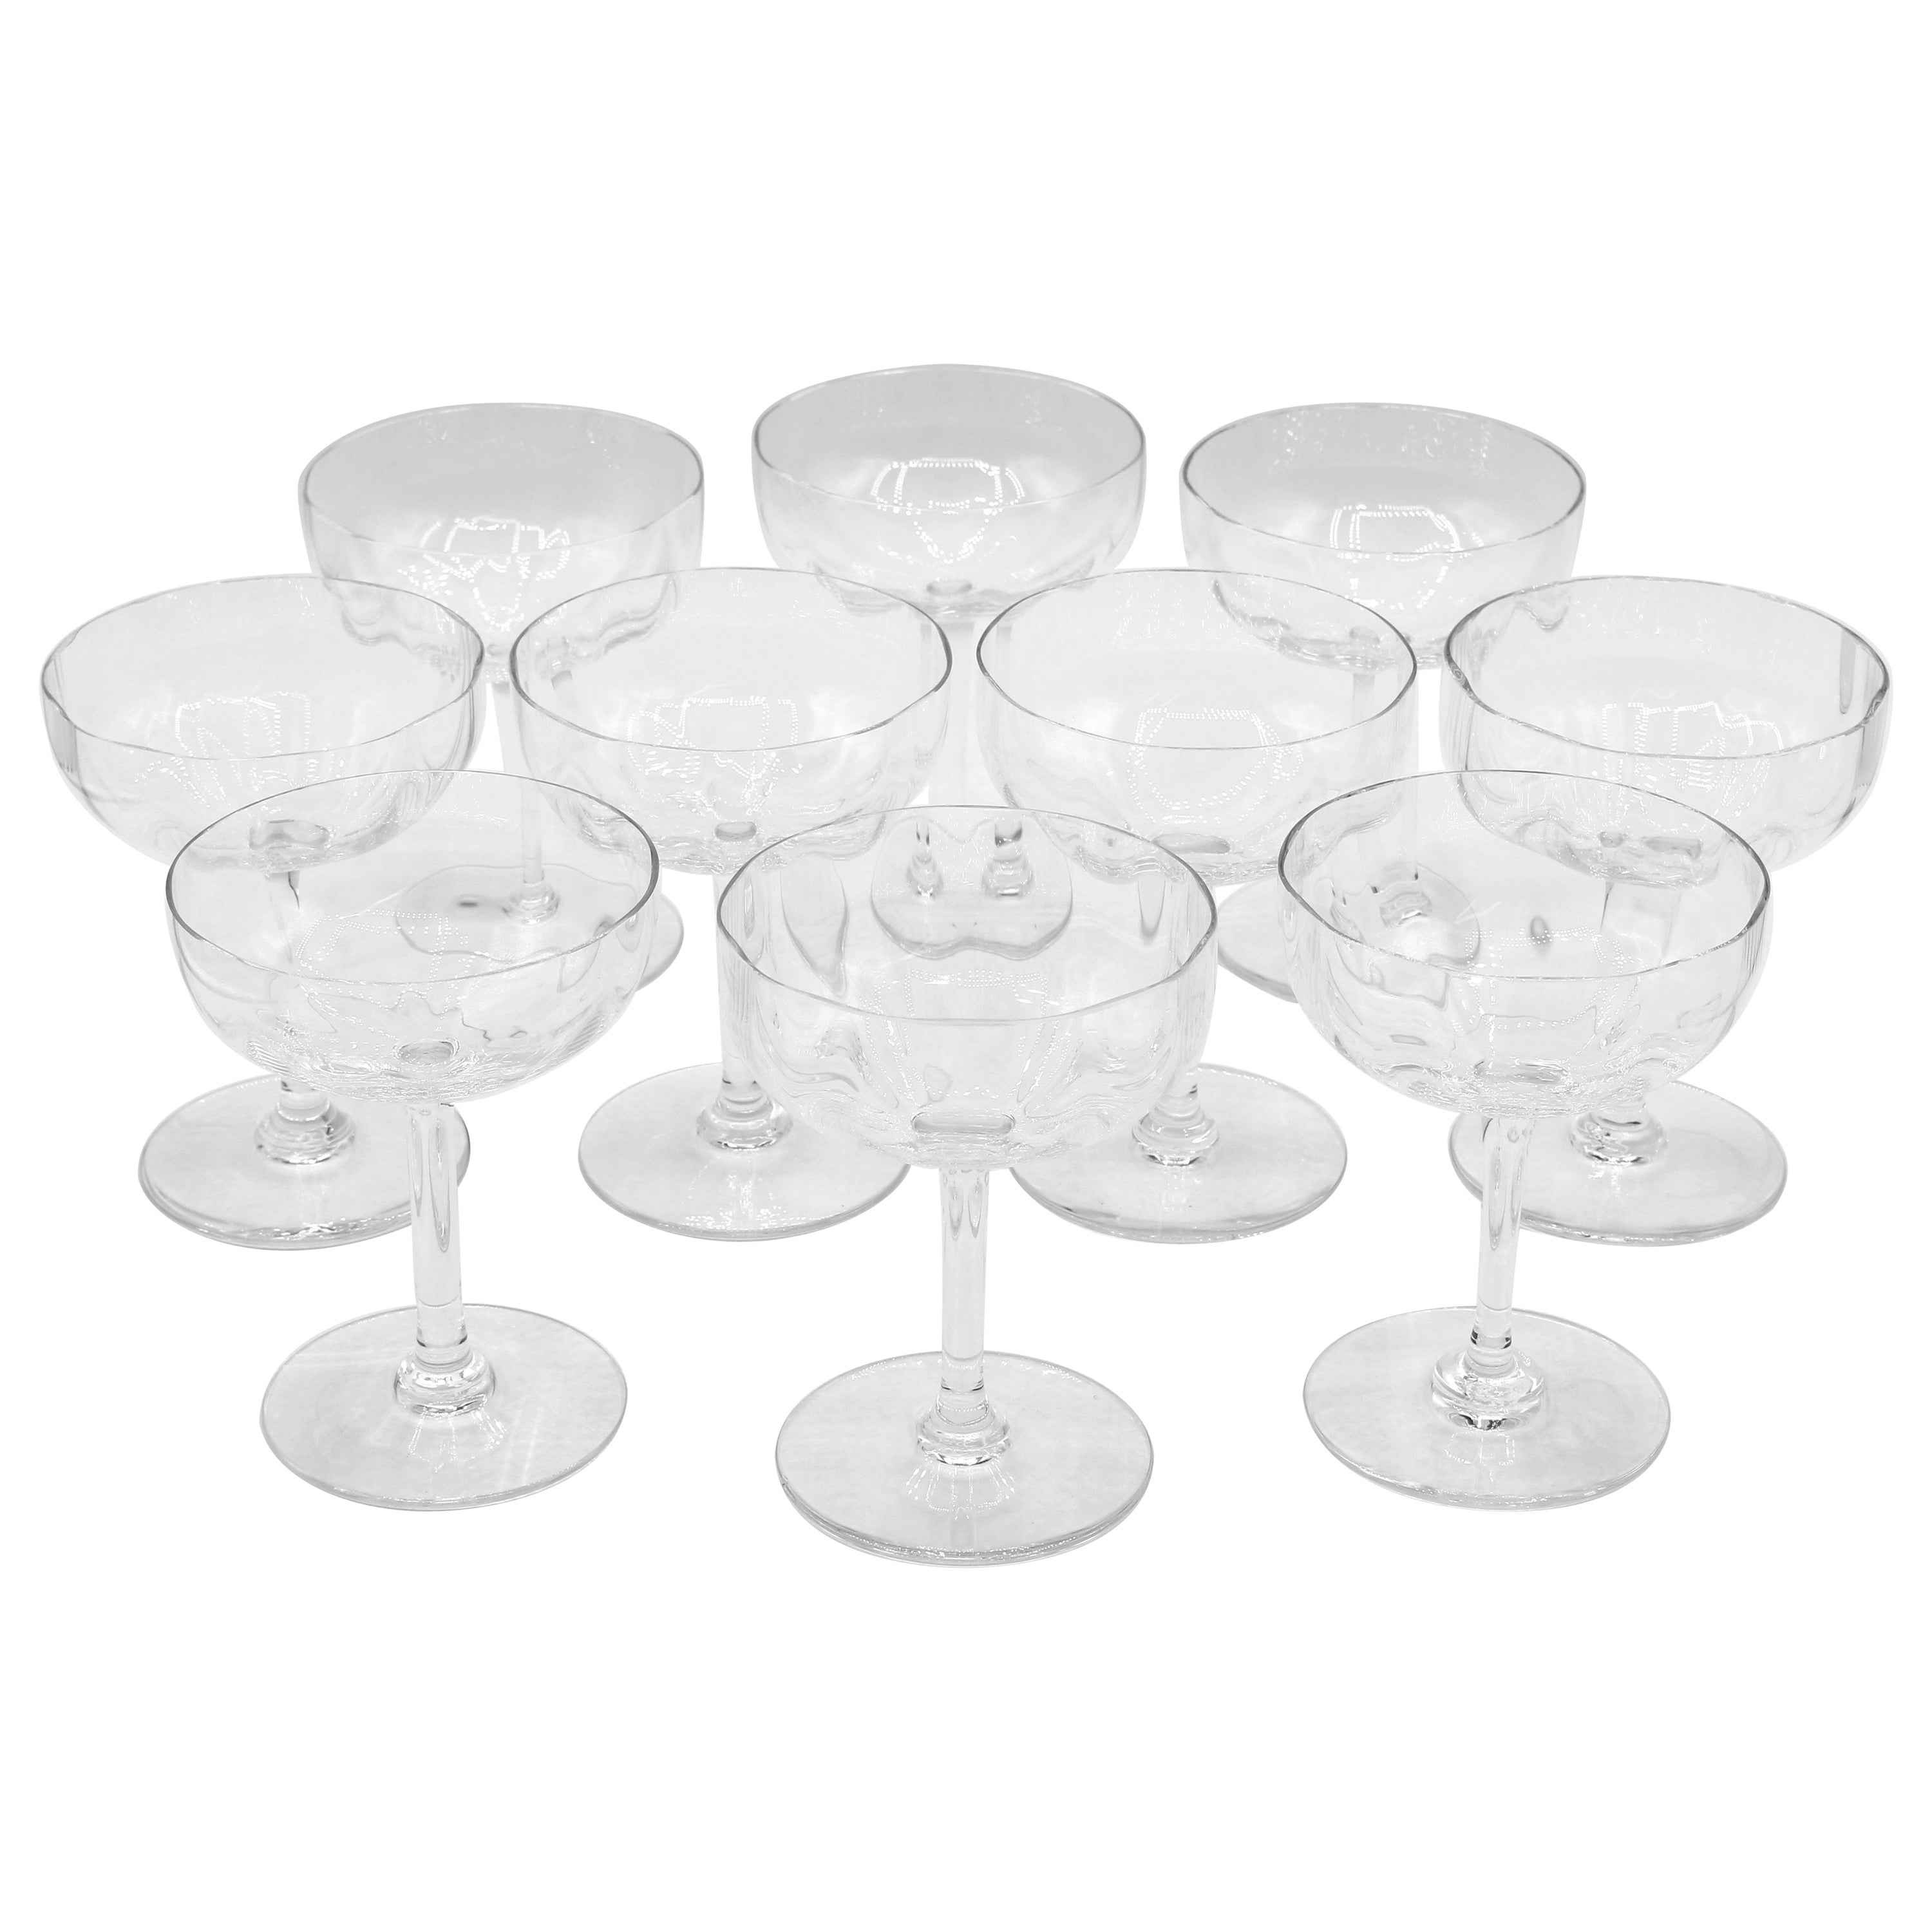 Set of 10 Baccarat Montaigne Optic Champagne Coupes or Sherbets